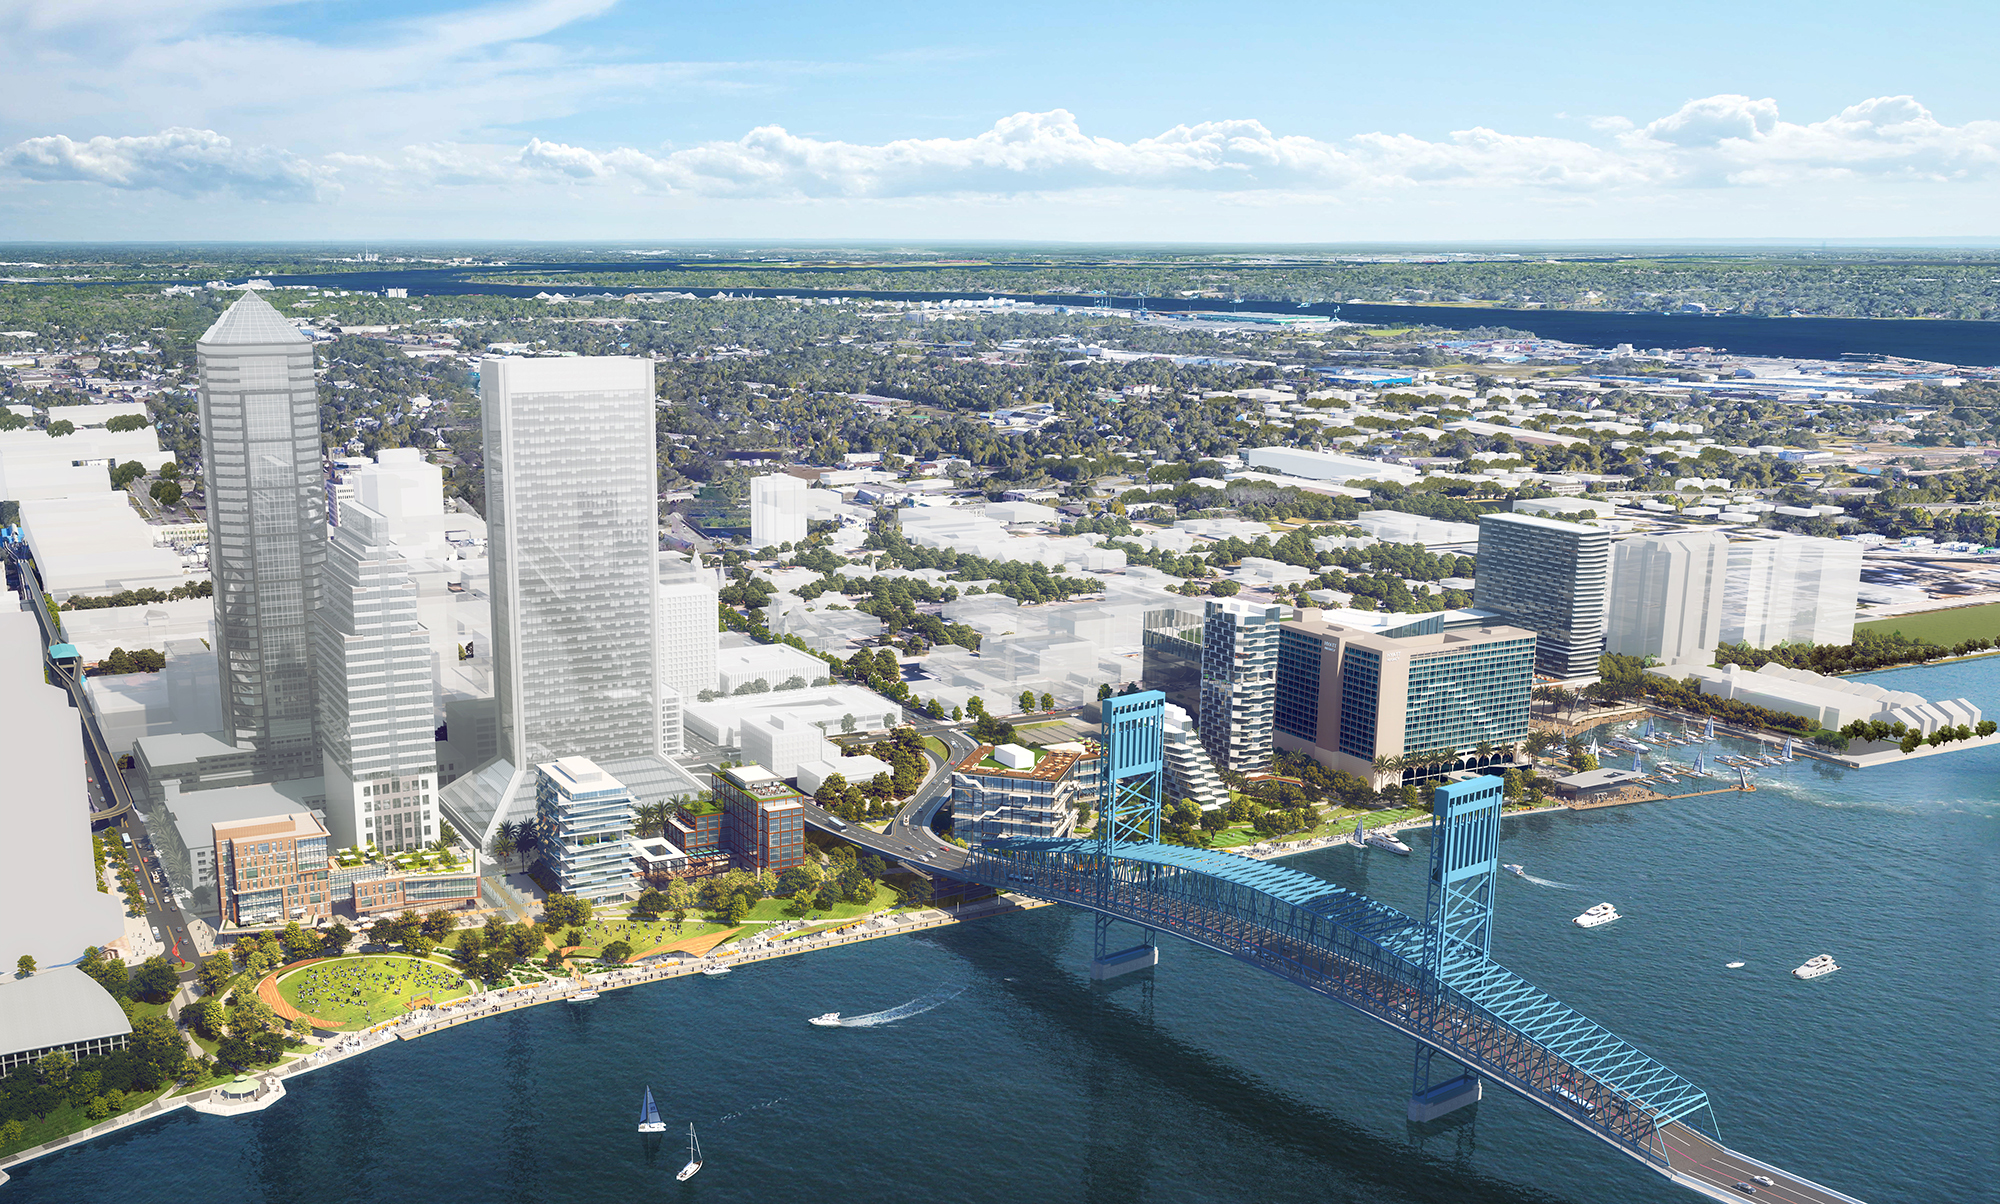 The developer says Riverfront Jacksonville would comprise more than 755 new residential units and 208 hotel rooms.